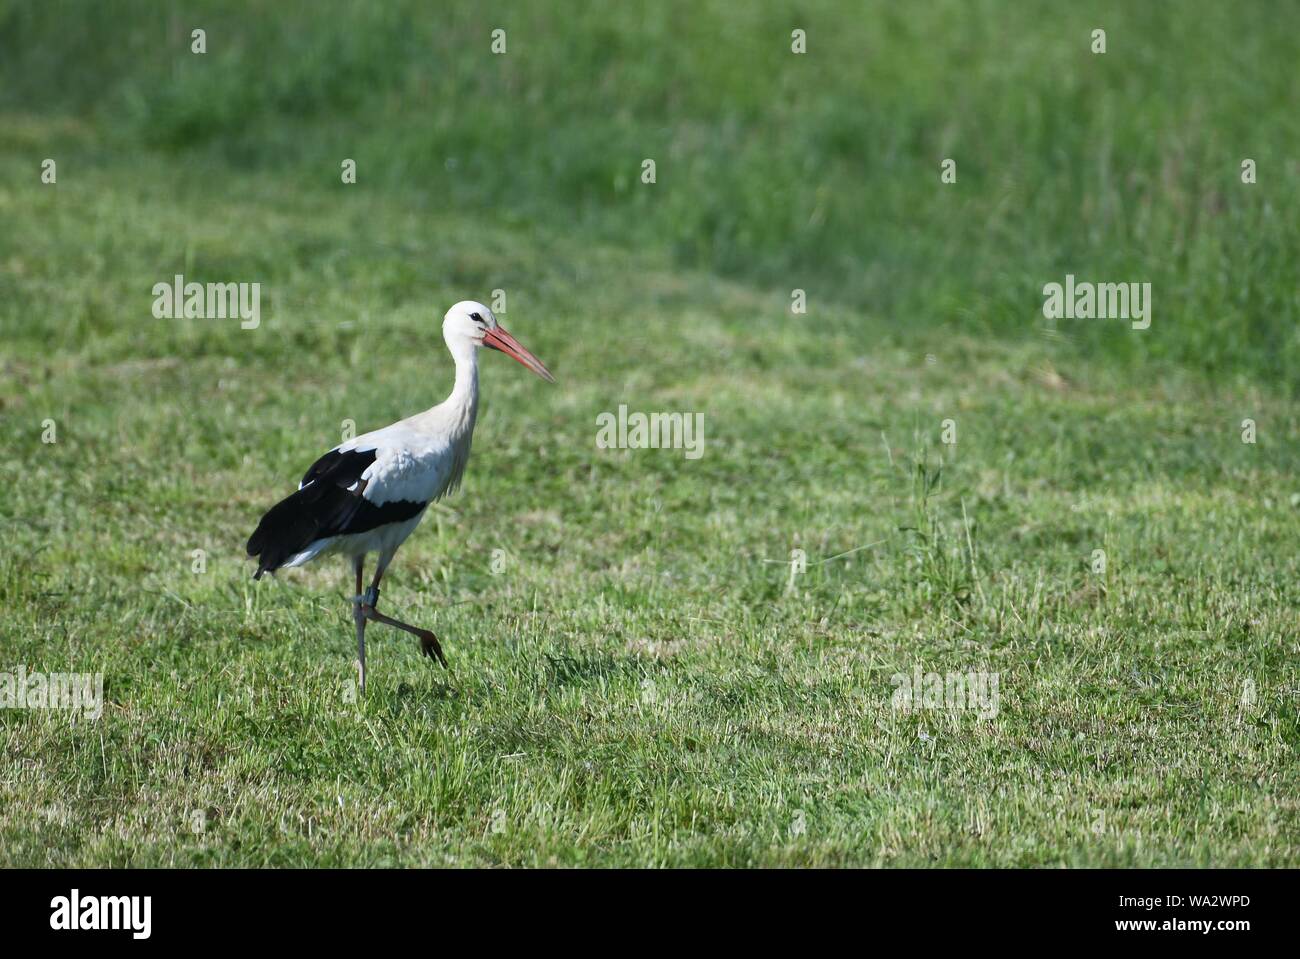 young stork in the meadow chasing dogs, Stock Photo